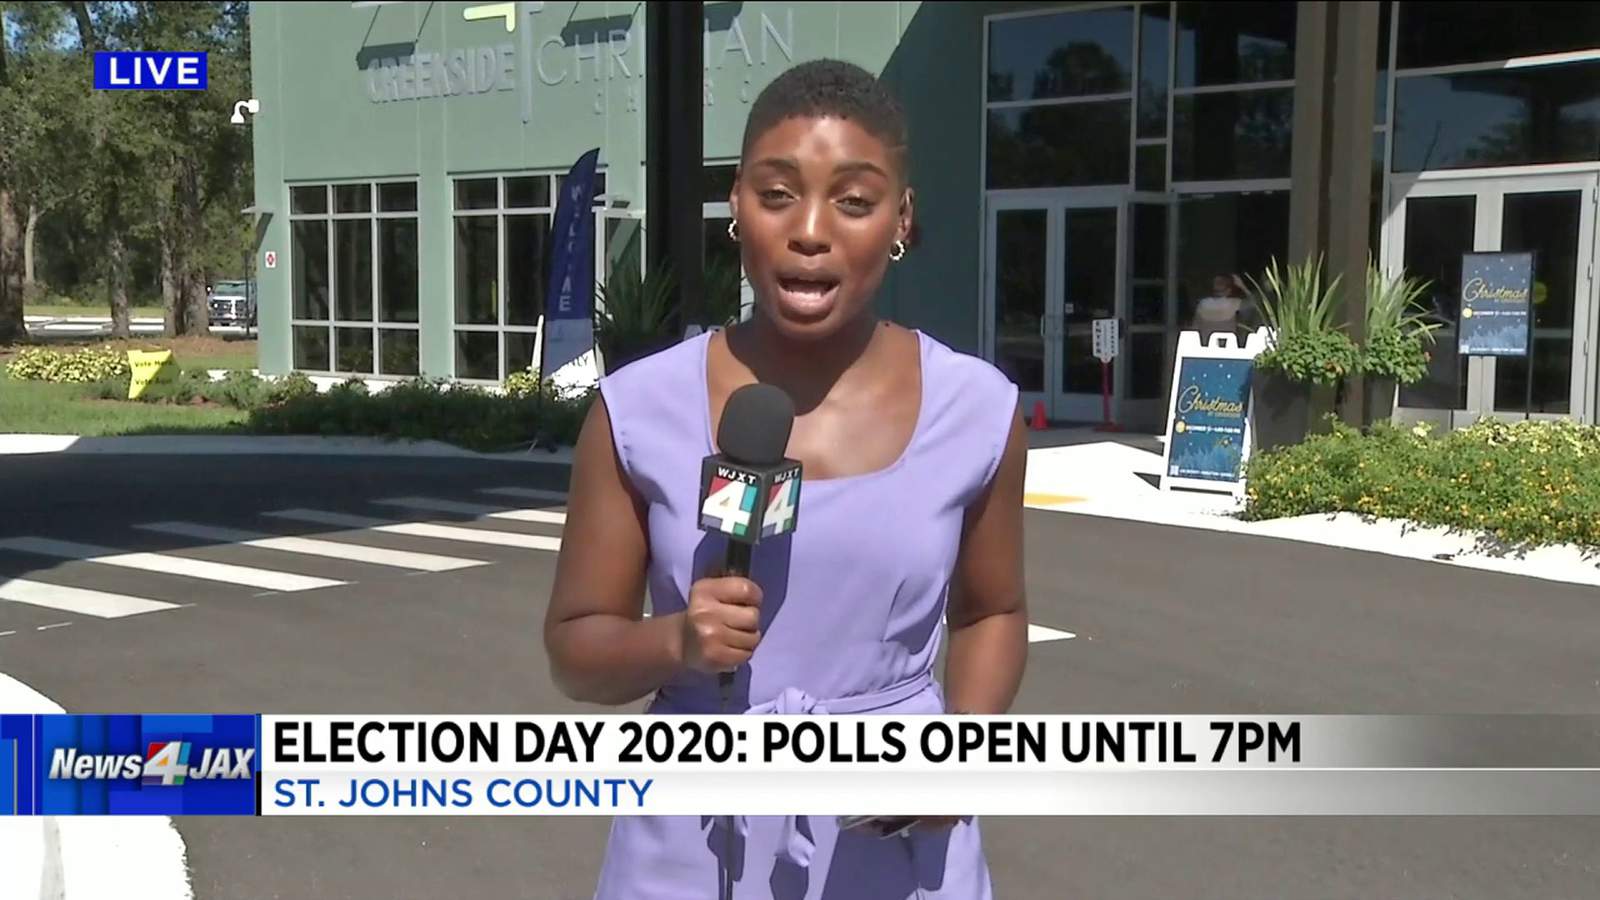 Lena Pringle checks in at noon on Election Day in St. Johns County